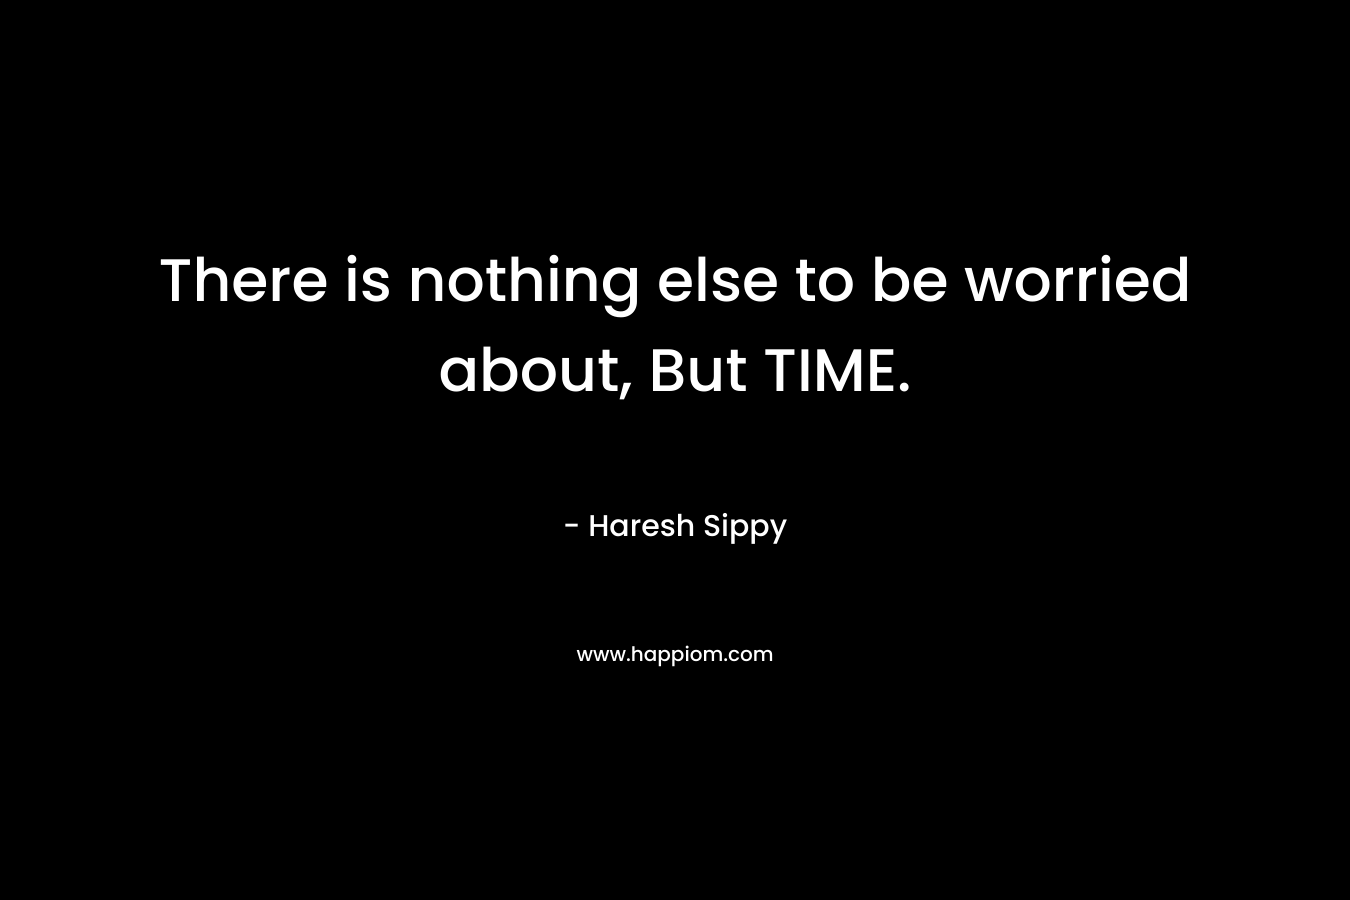 There is nothing else to be worried about, But TIME.